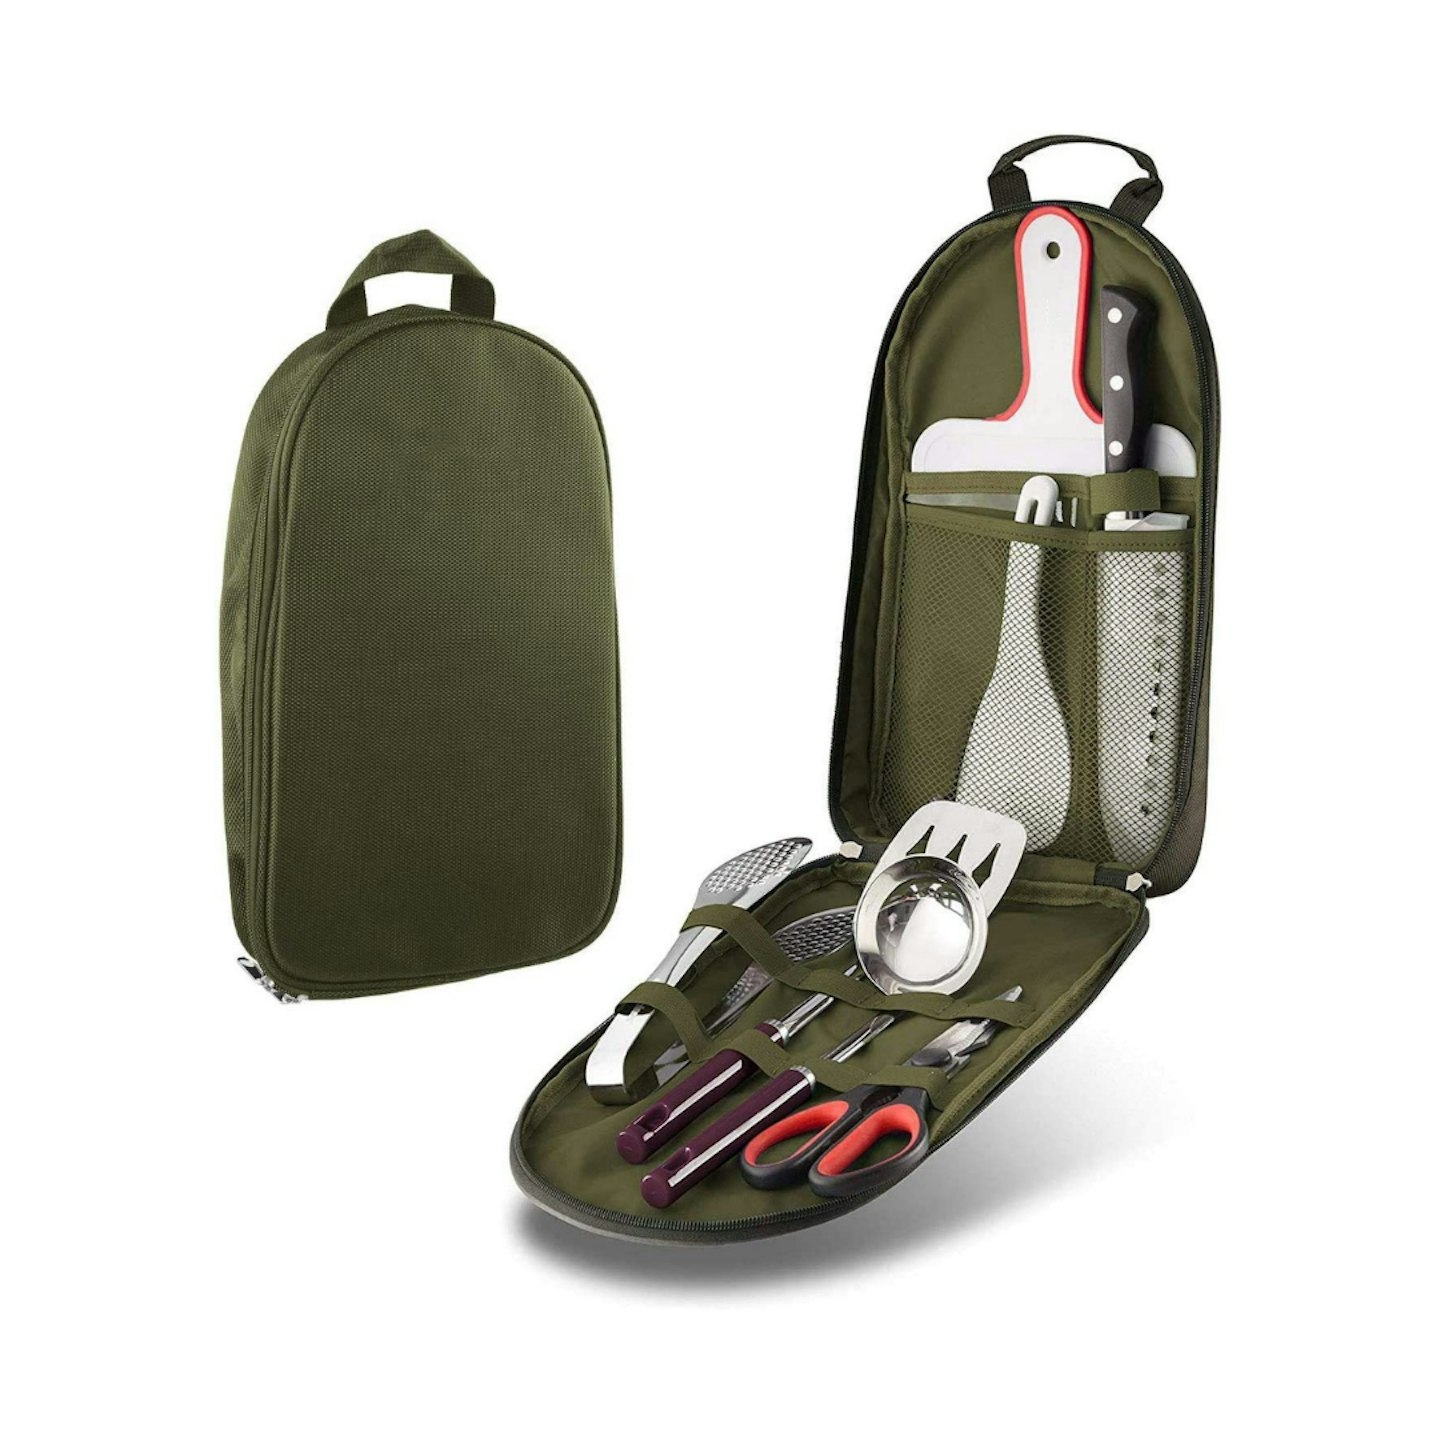 Camping Accessories Set